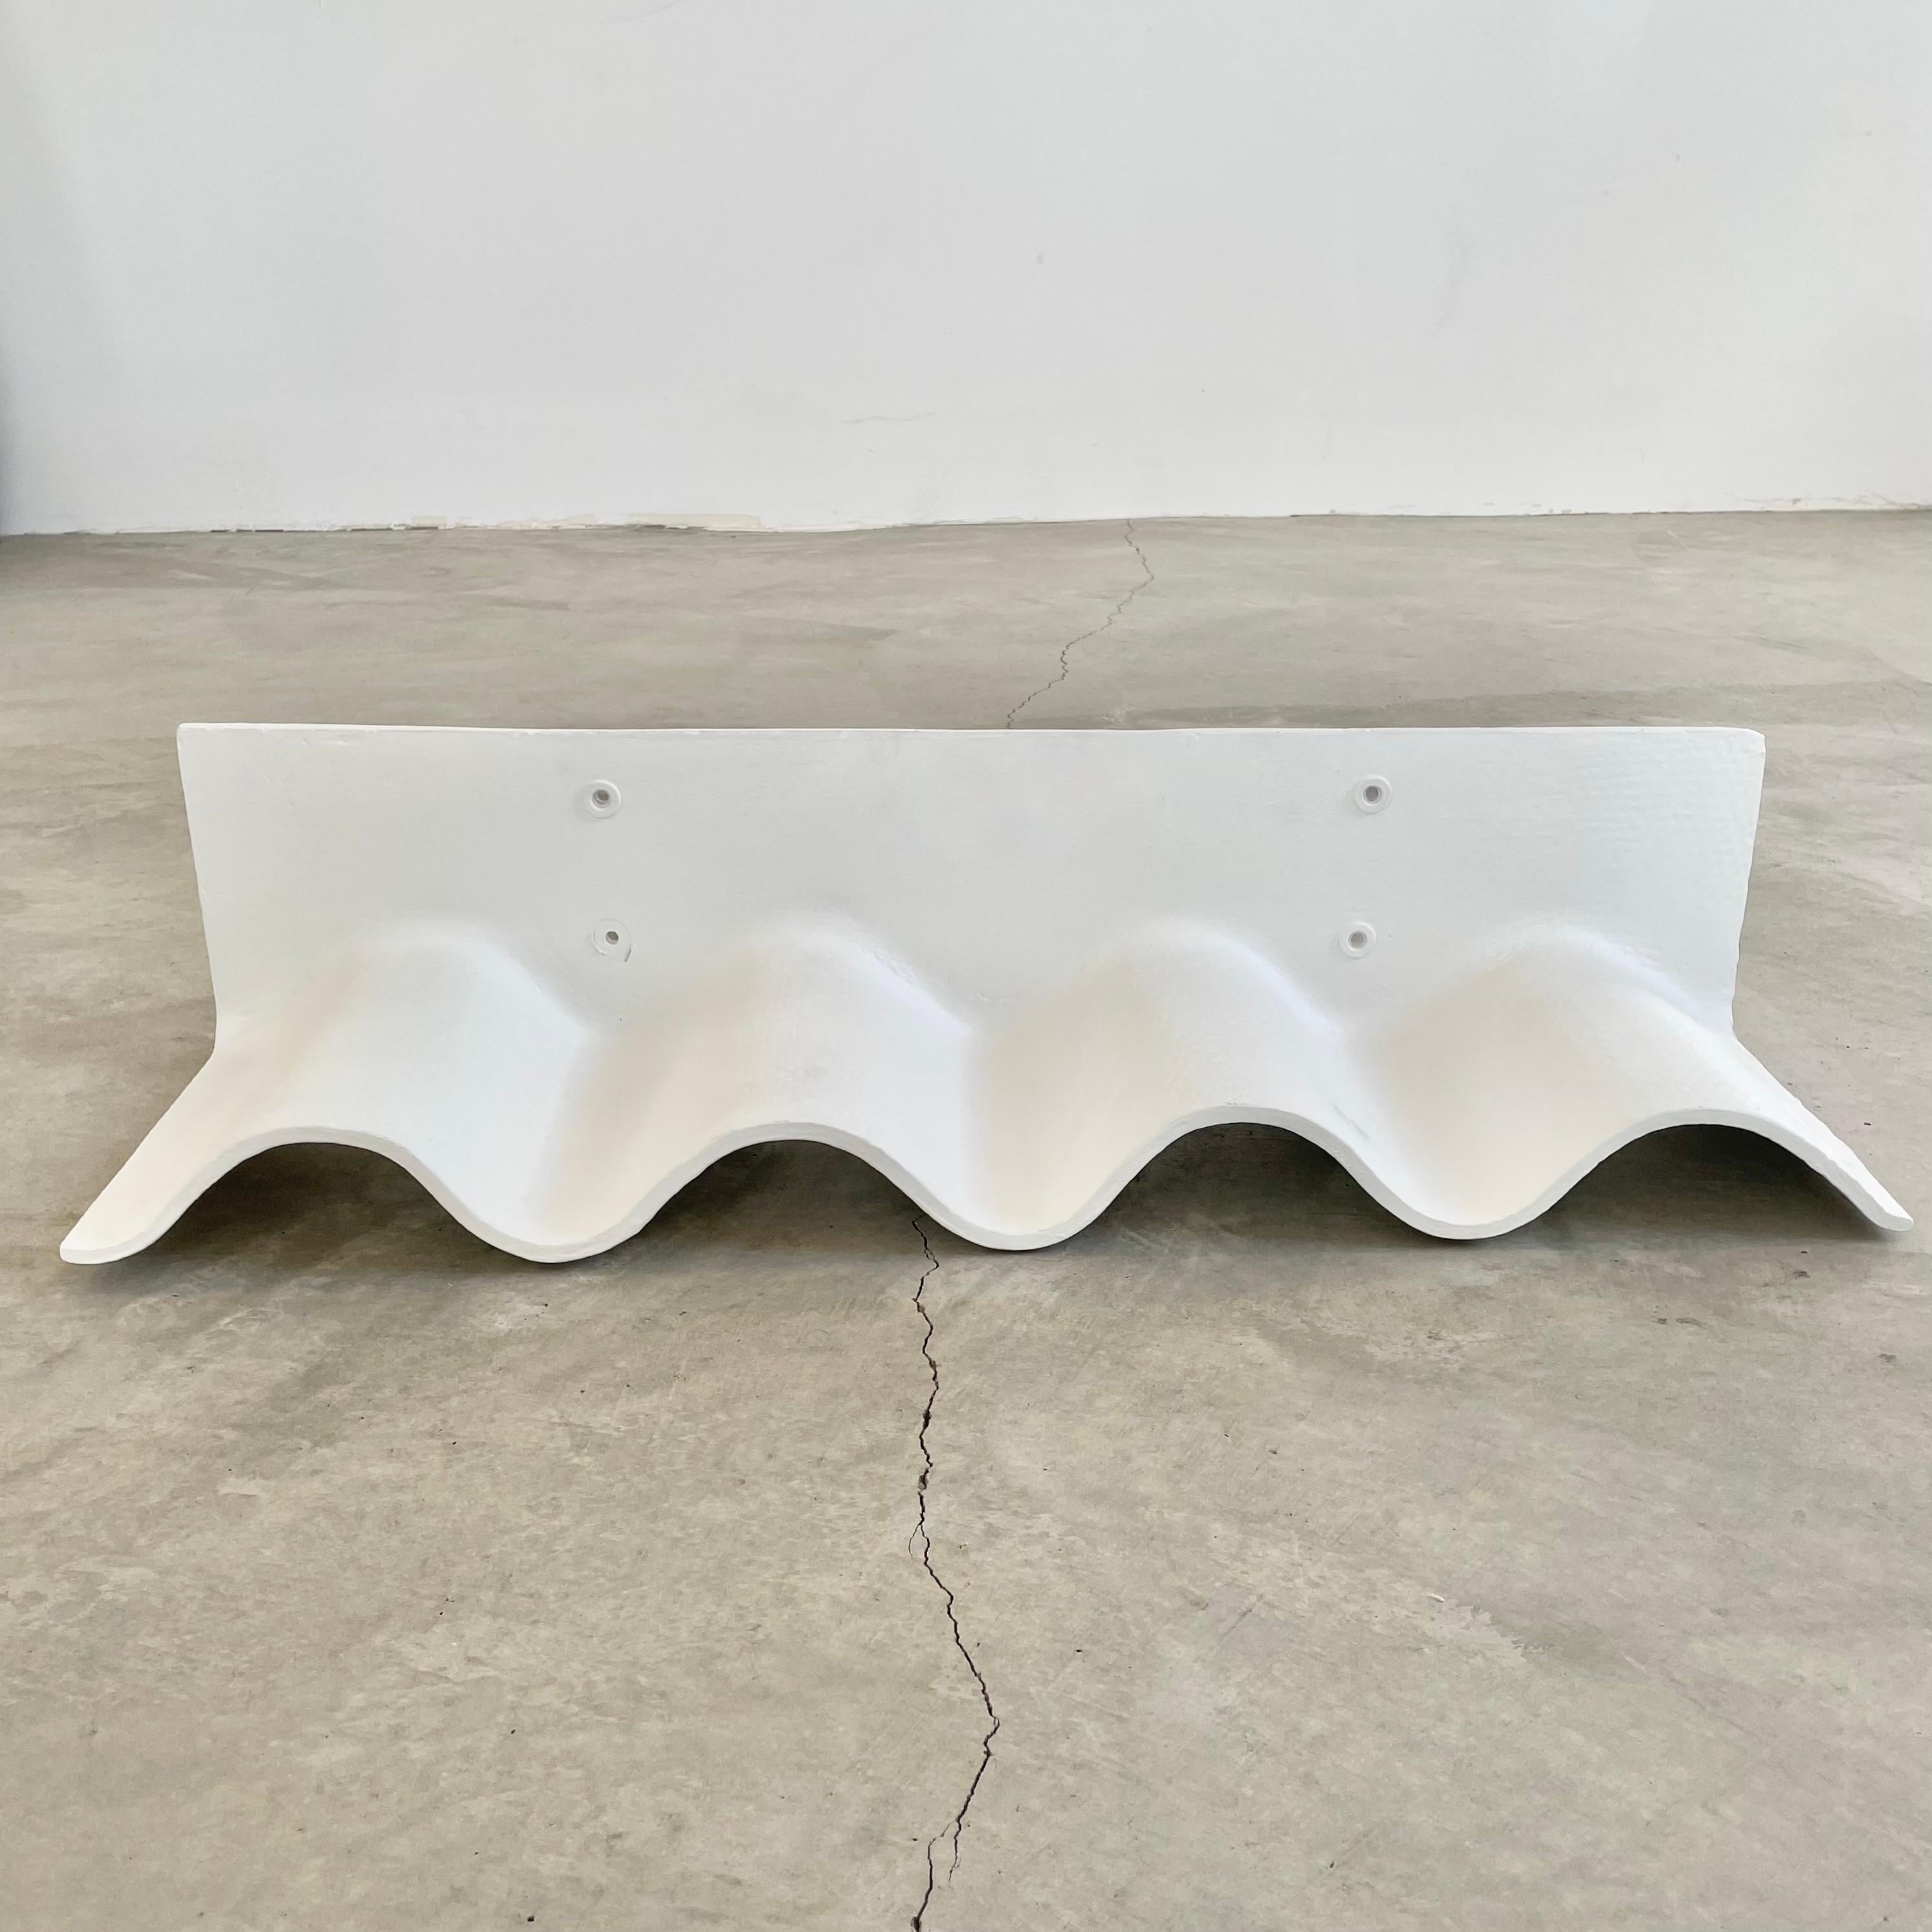 Rare shelf by Willy Guhl. Taken from a public indoor pool in Germany. Perfect for rolled up towels or shampoo bottles by an outdoor shower. Excellent vintage condition. Great indoors or out. Only one available.

